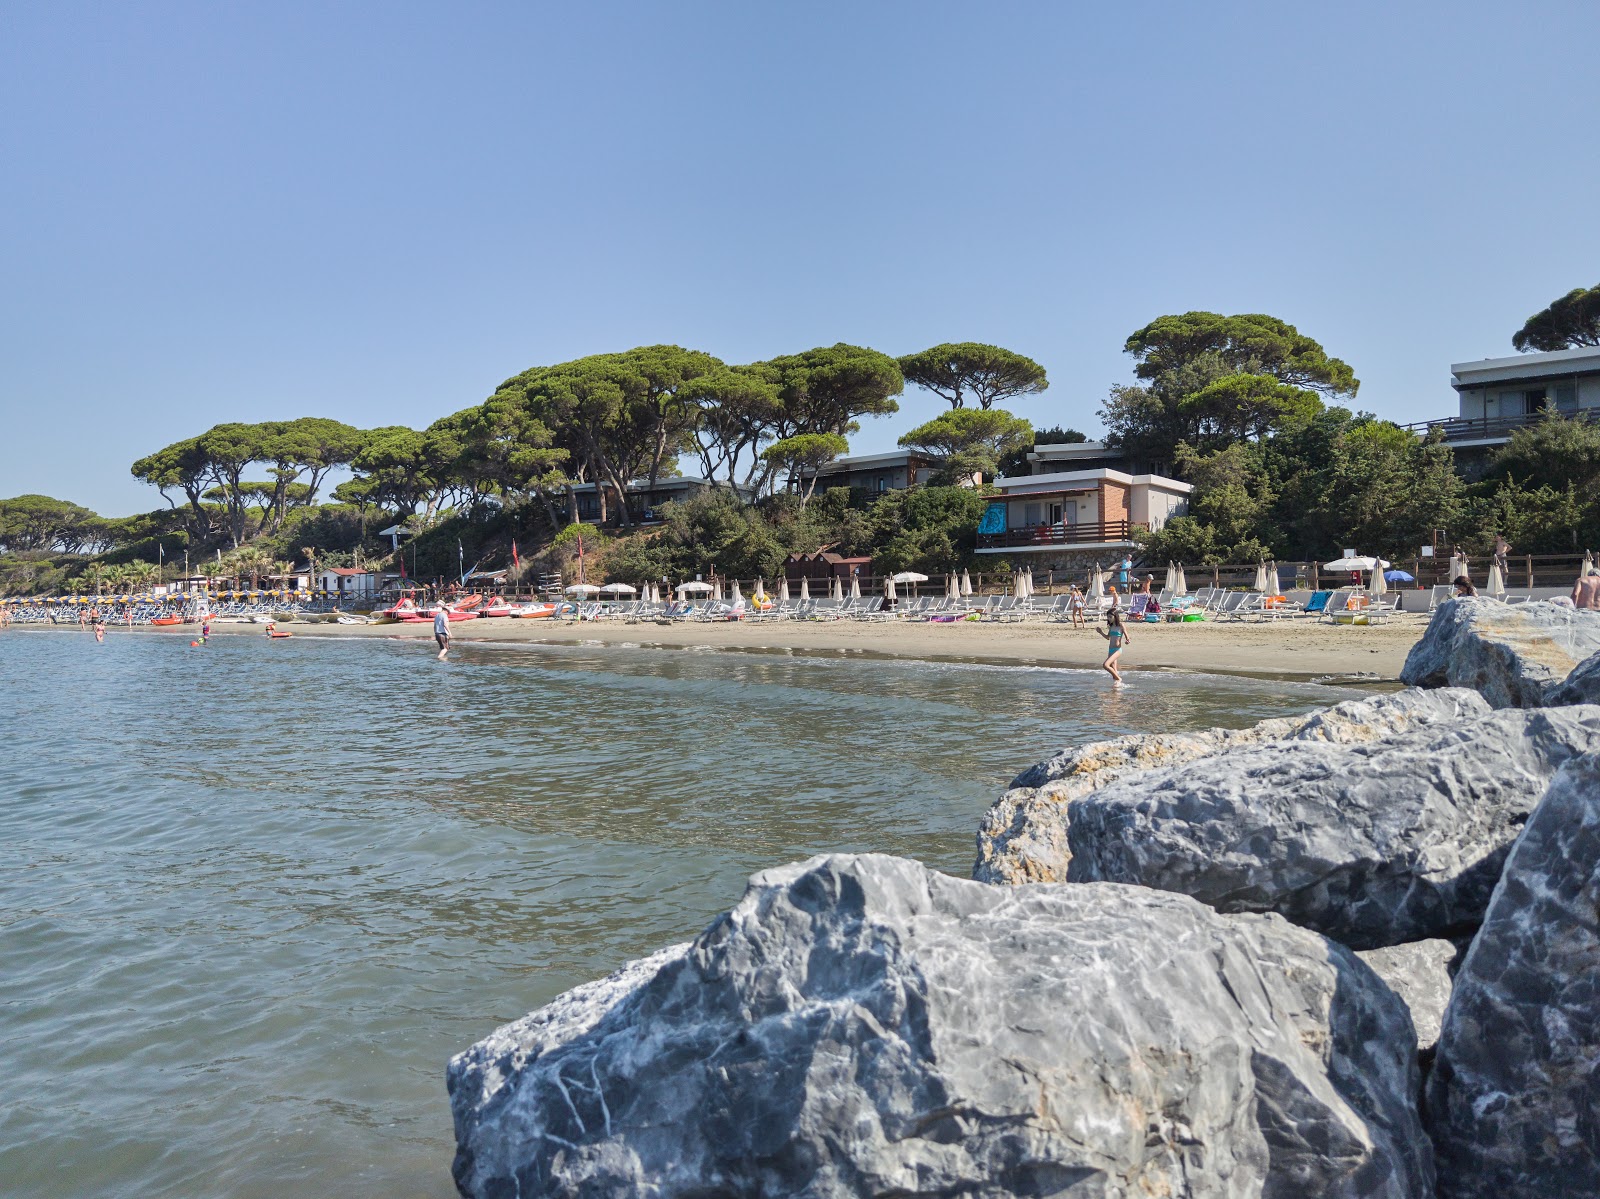 Photo of Spiaggia Golfo del Sole - popular place among relax connoisseurs